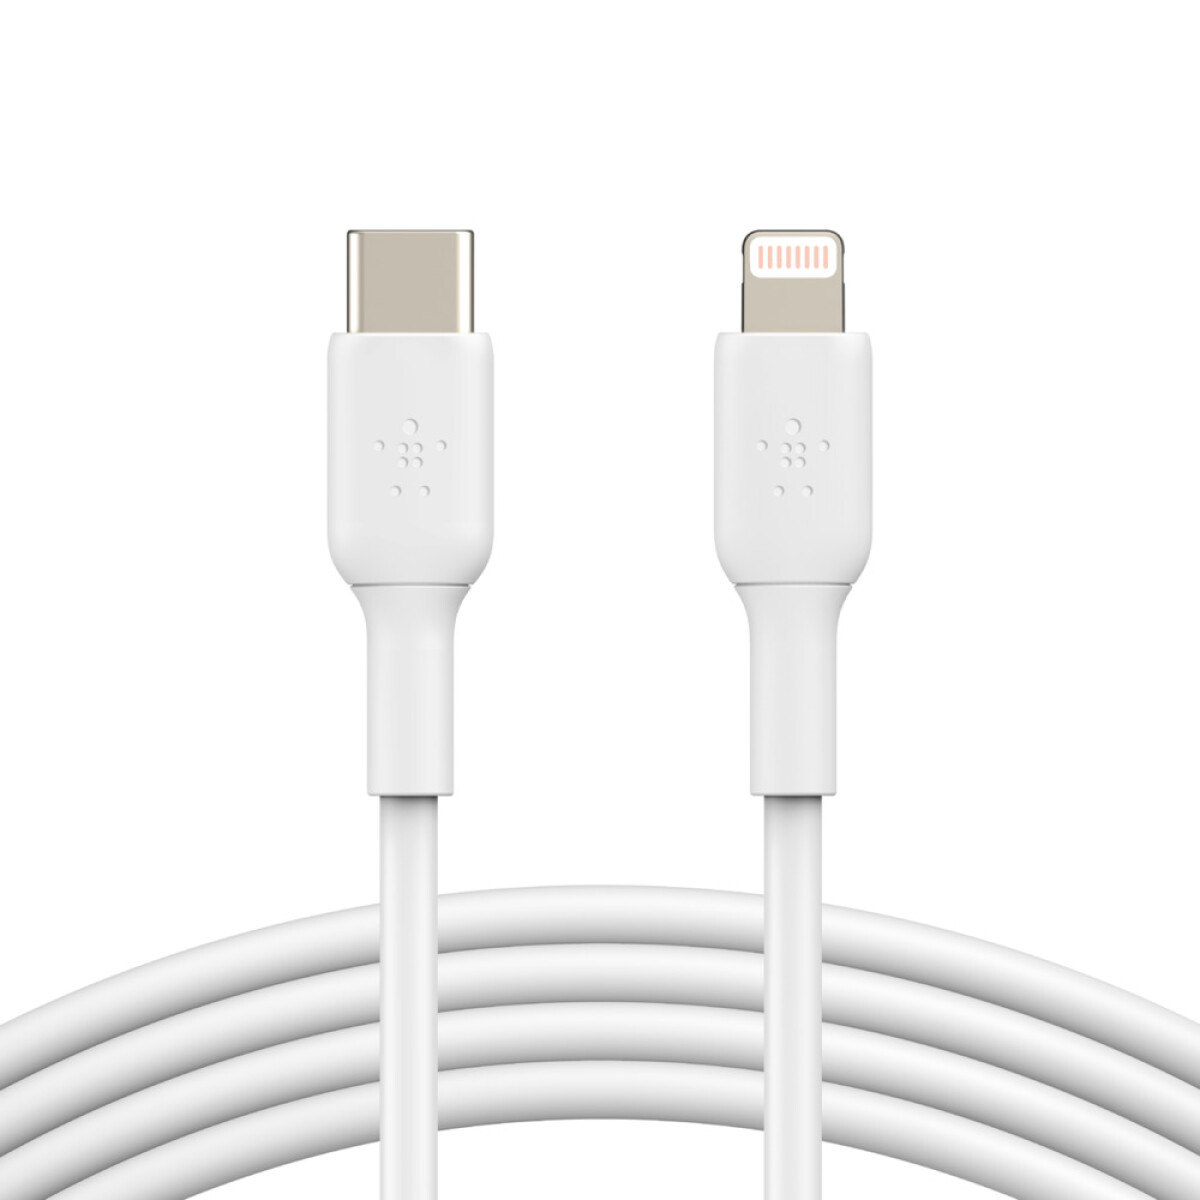 CABLE BOOST CHARGE LIGHTNING TO USB-C 1M 3.3FT BELKIN - BLANCO 